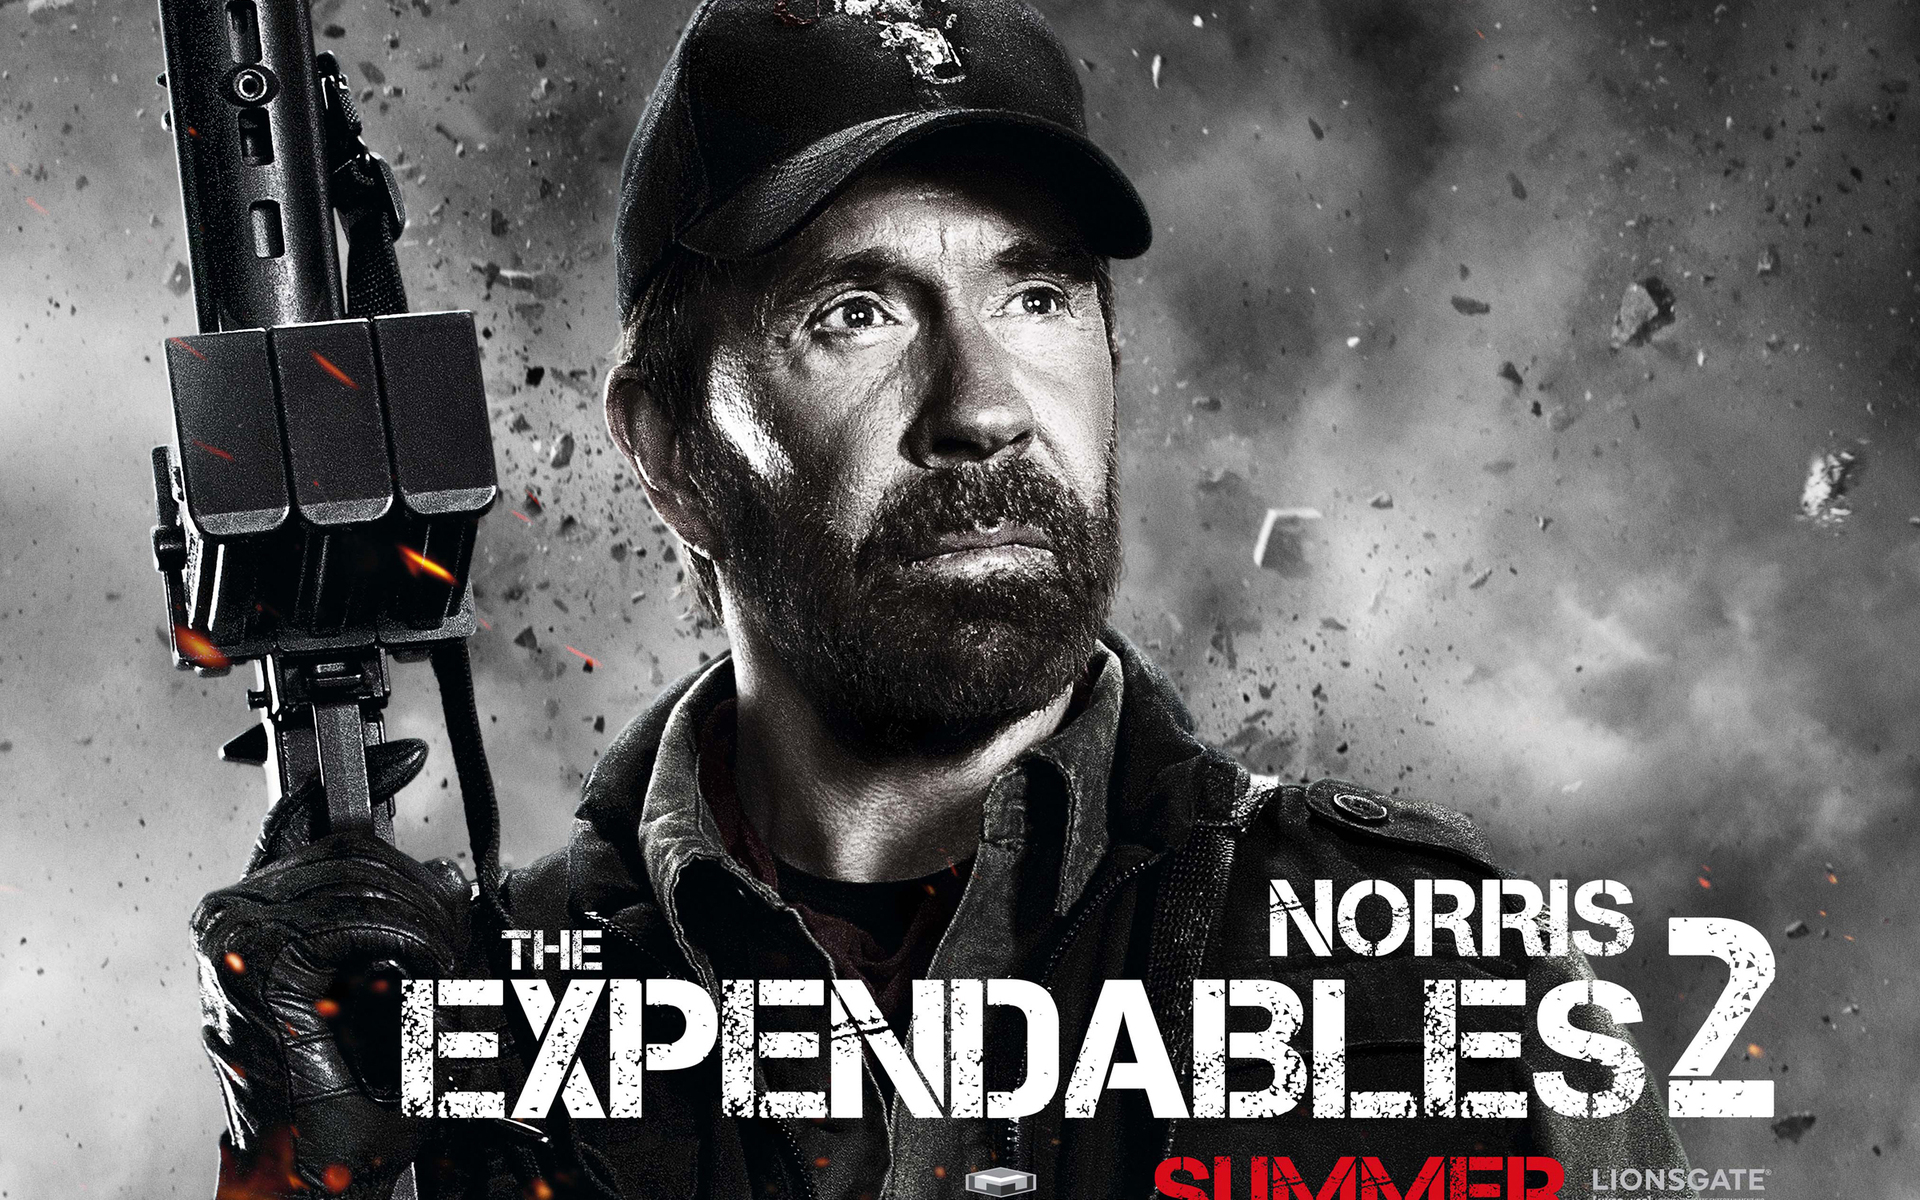 chuck norris, movie, the expendables 2, booker (the expendables), the expendables 5K